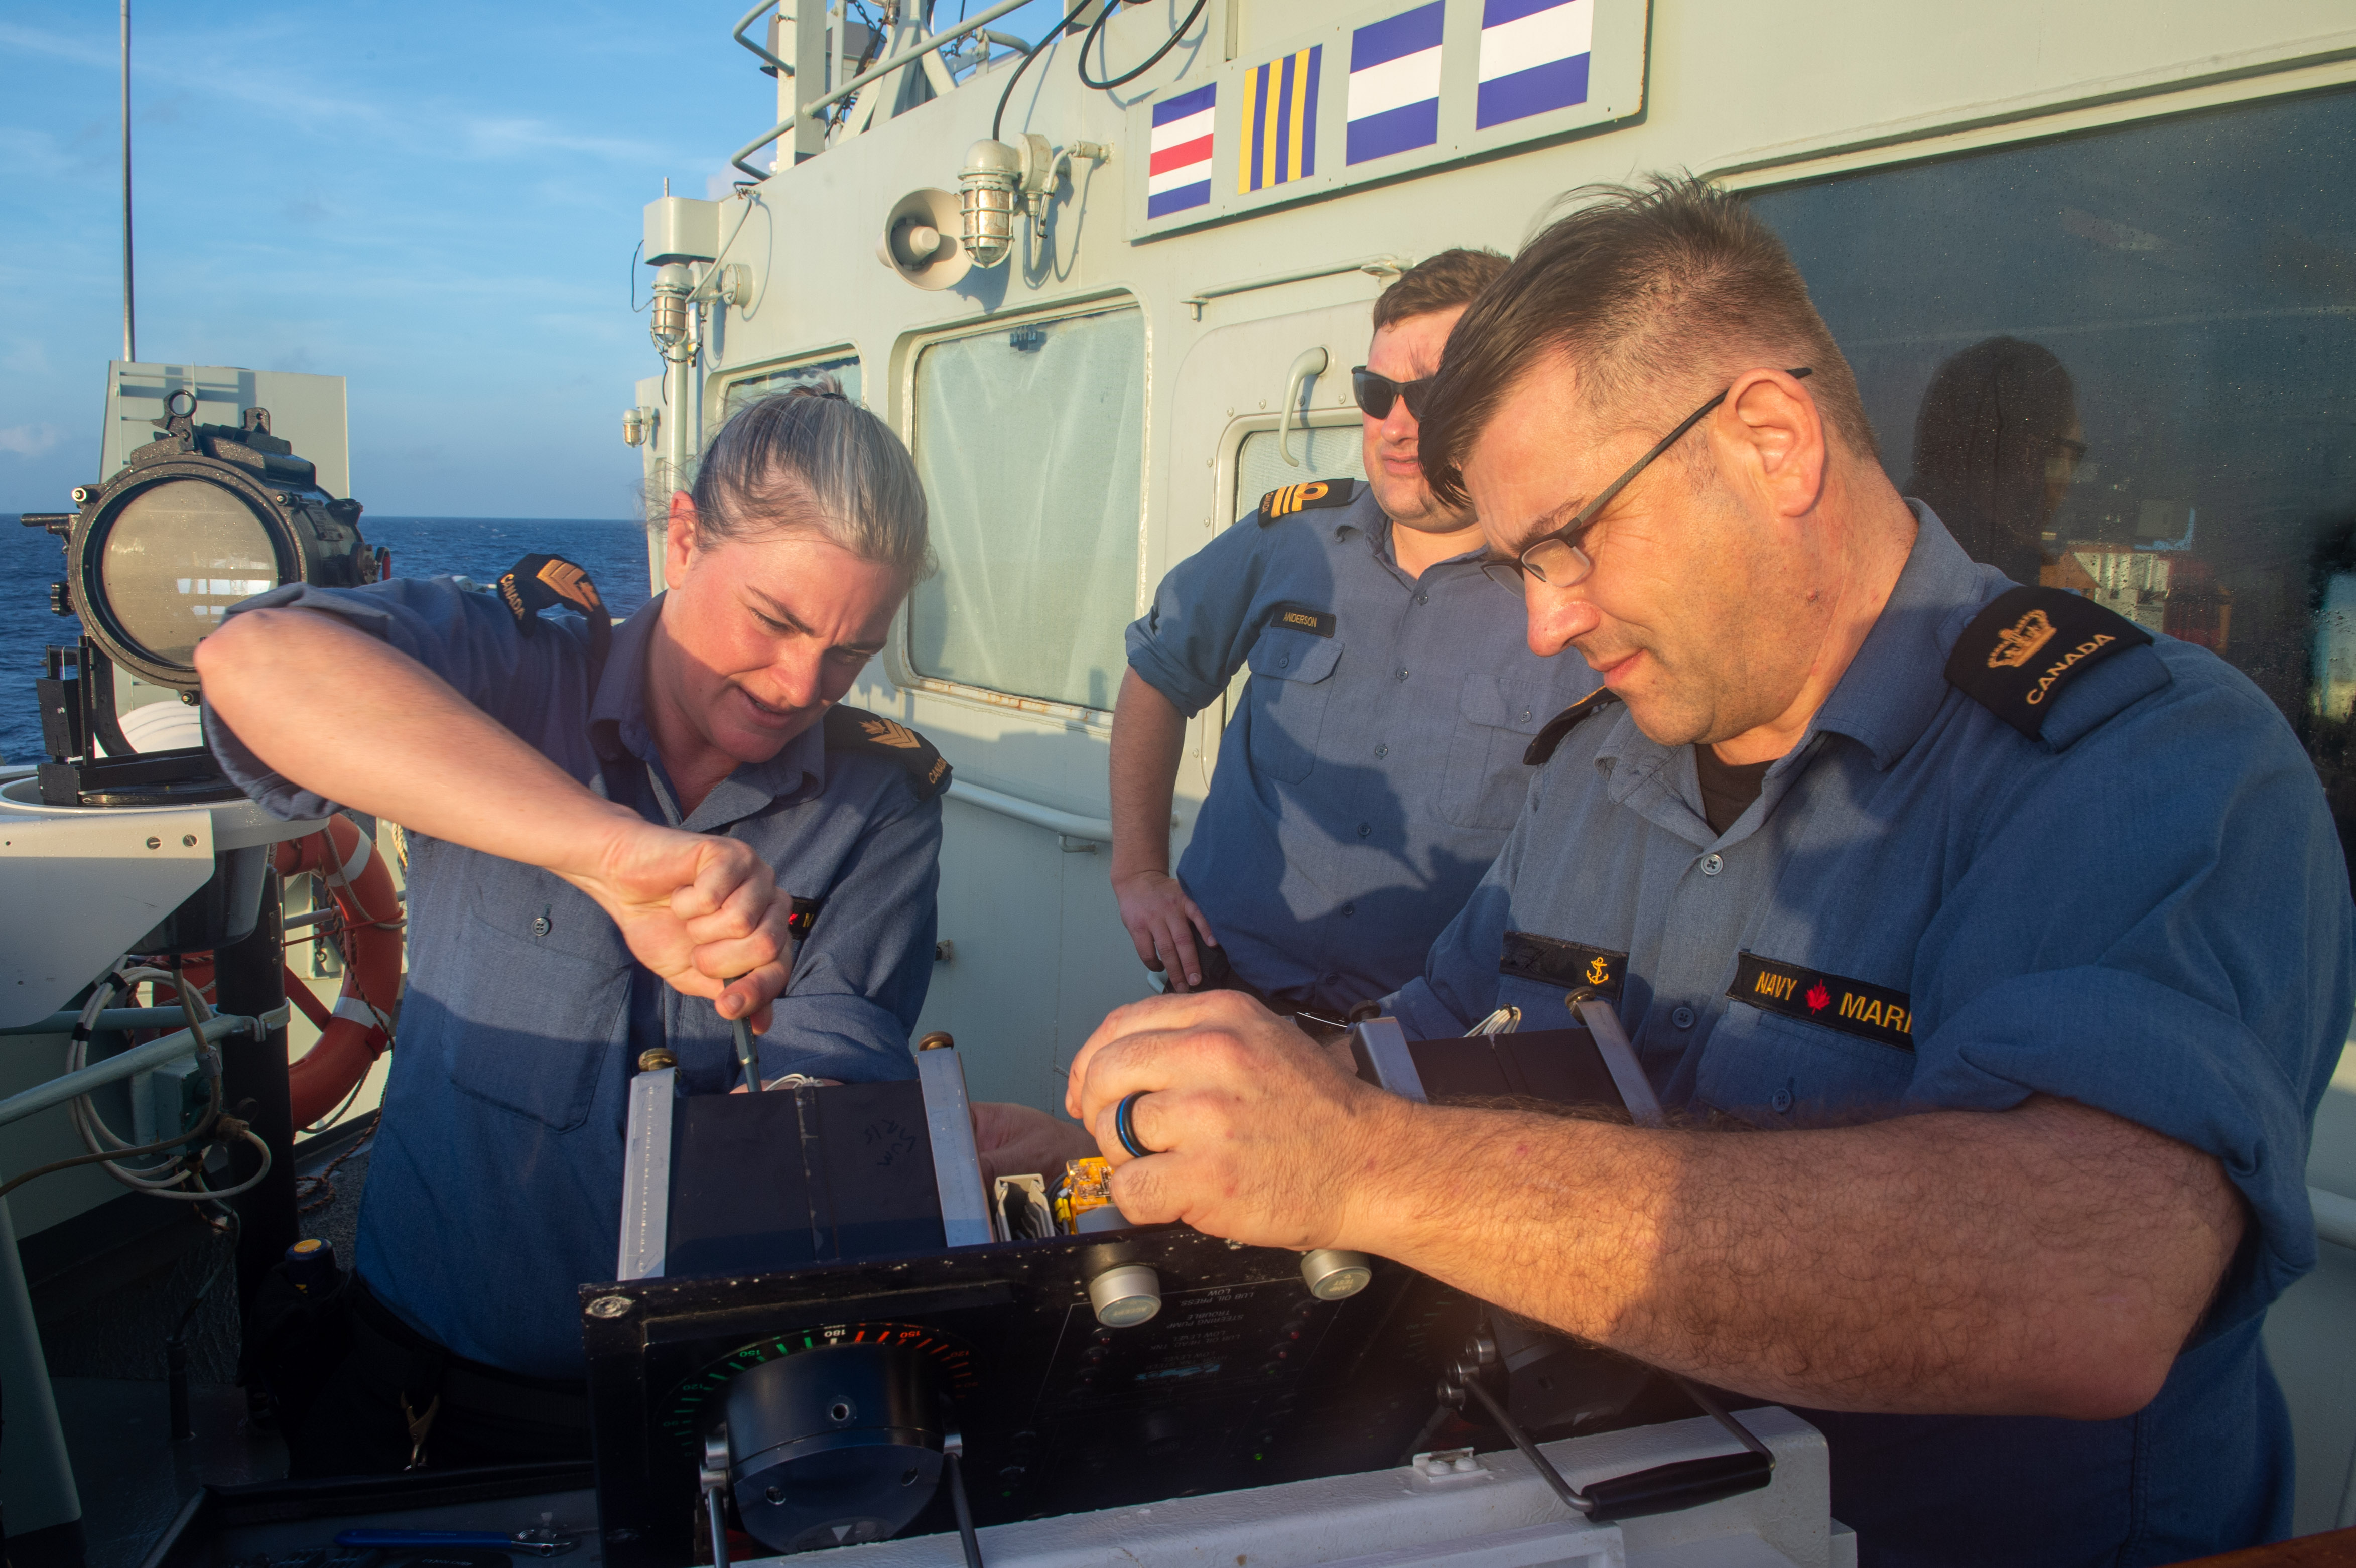 Image has been digitally altered for operational security purposes.
 
HMCS Summerside crew members work on the helm console during Operation CARIBBE, in the Atlantic Ocean on October 29, 2020.